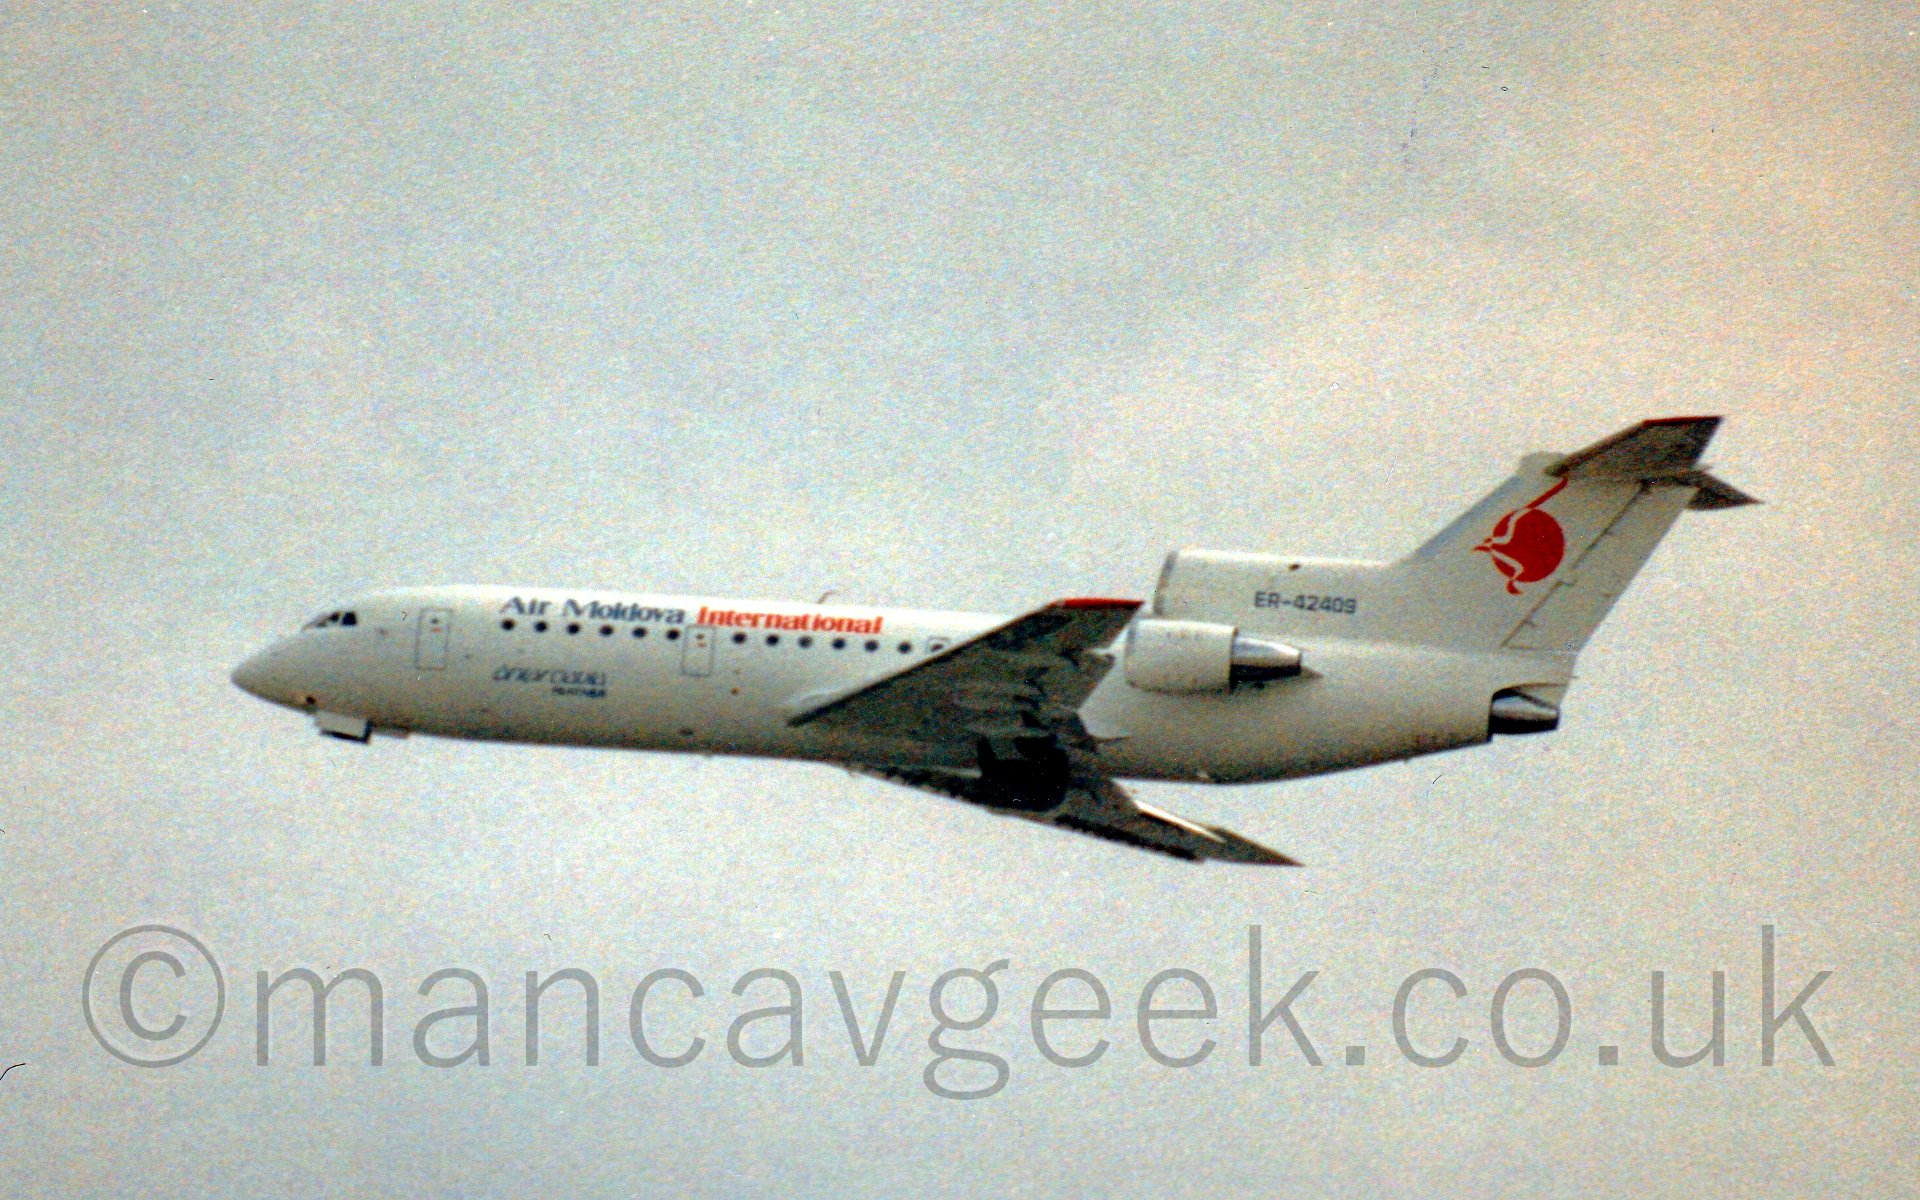 Somewhat grainy, hazy side view of a 3 engined jet airliner with the engines mounted on the rear fuselage, flying from right to left at a low altitude, with gear retracting, flaps deployed from behind the wing, and the nose raised, suggesting it has just taken off. The plane is almost entirely white, with blue and red "Air Moldova International" titles on the forward upper fuselage, and the registration "ER-42409" on the centre engine intake. The tail has a red circle, with a stylised white and red image of a flying bird overlaid. A hazy grey sky fills the rest of the frame.